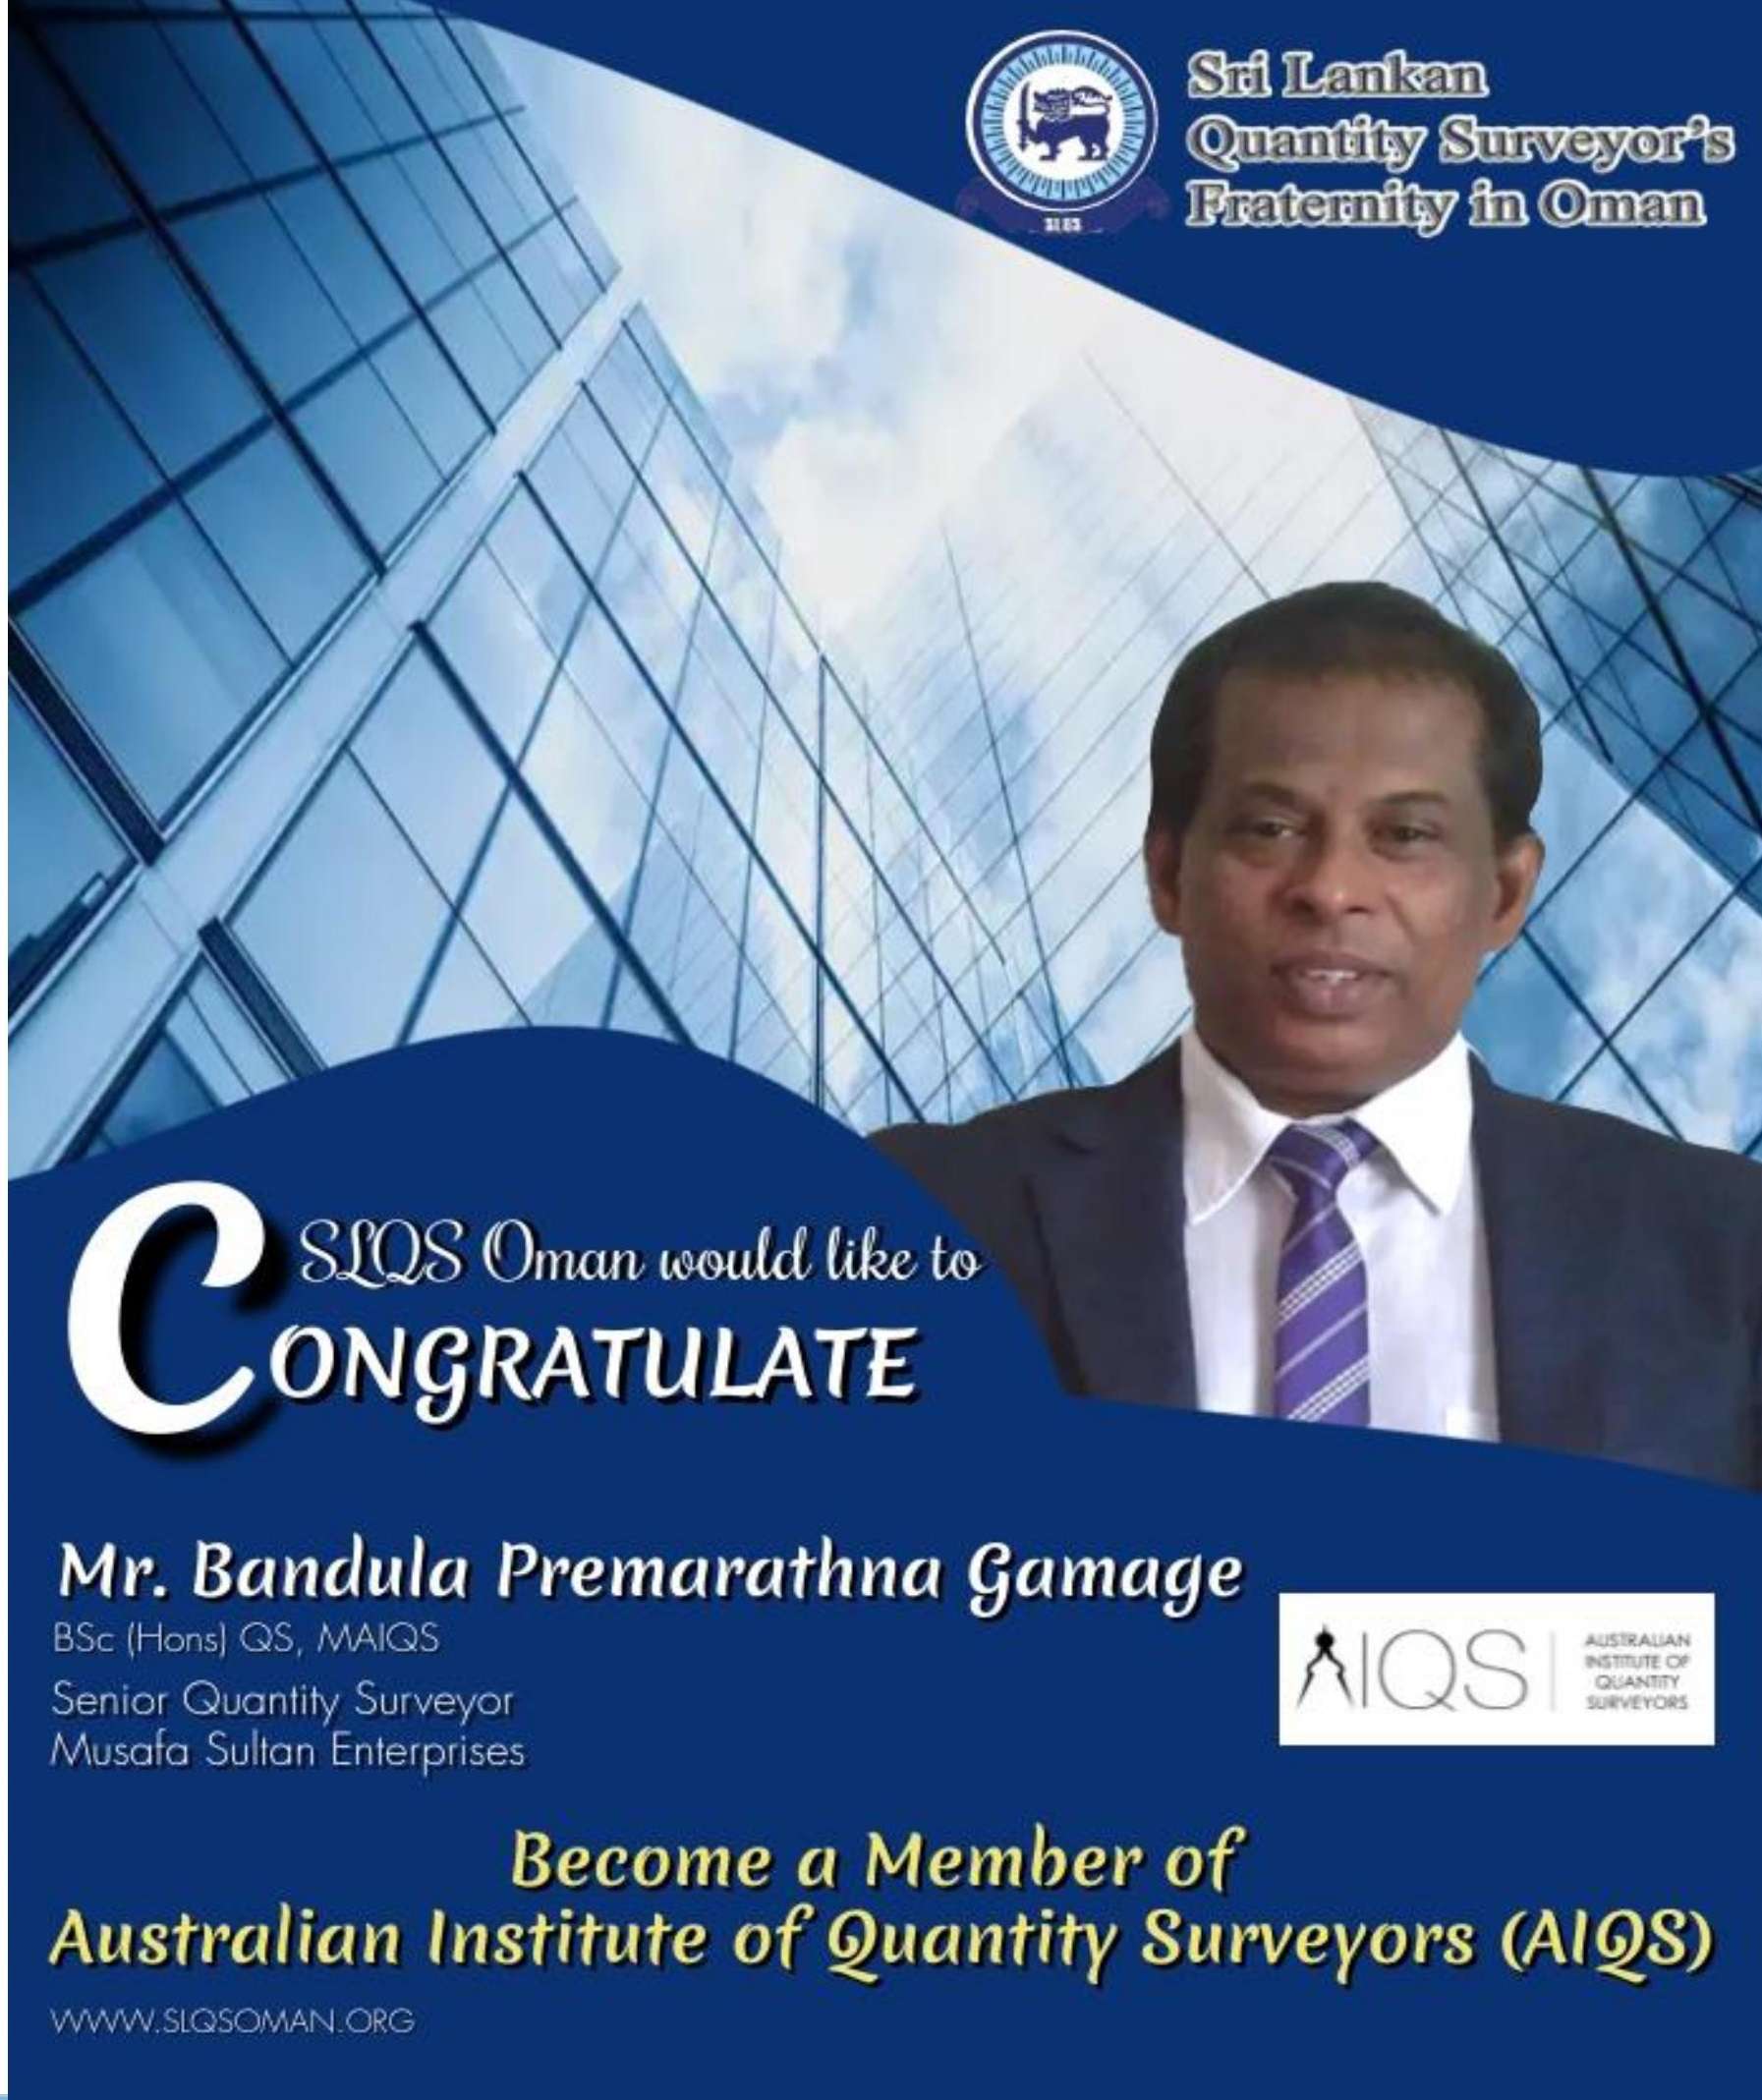 Congratulations!! Mr Bandara Gamage !! For Becoming A Member of AIQS